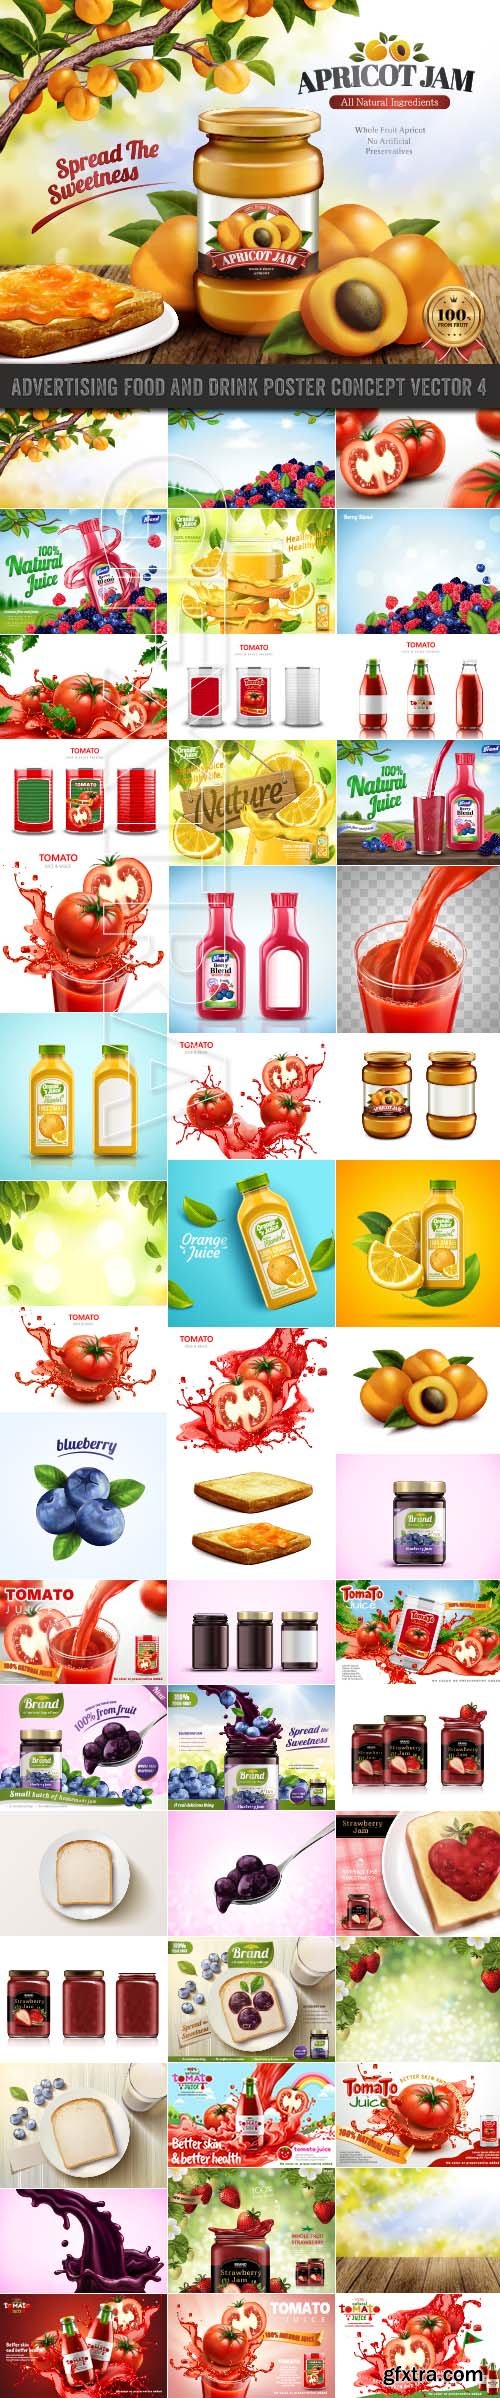 Advertising Food and Drink Poster Concept vector 4